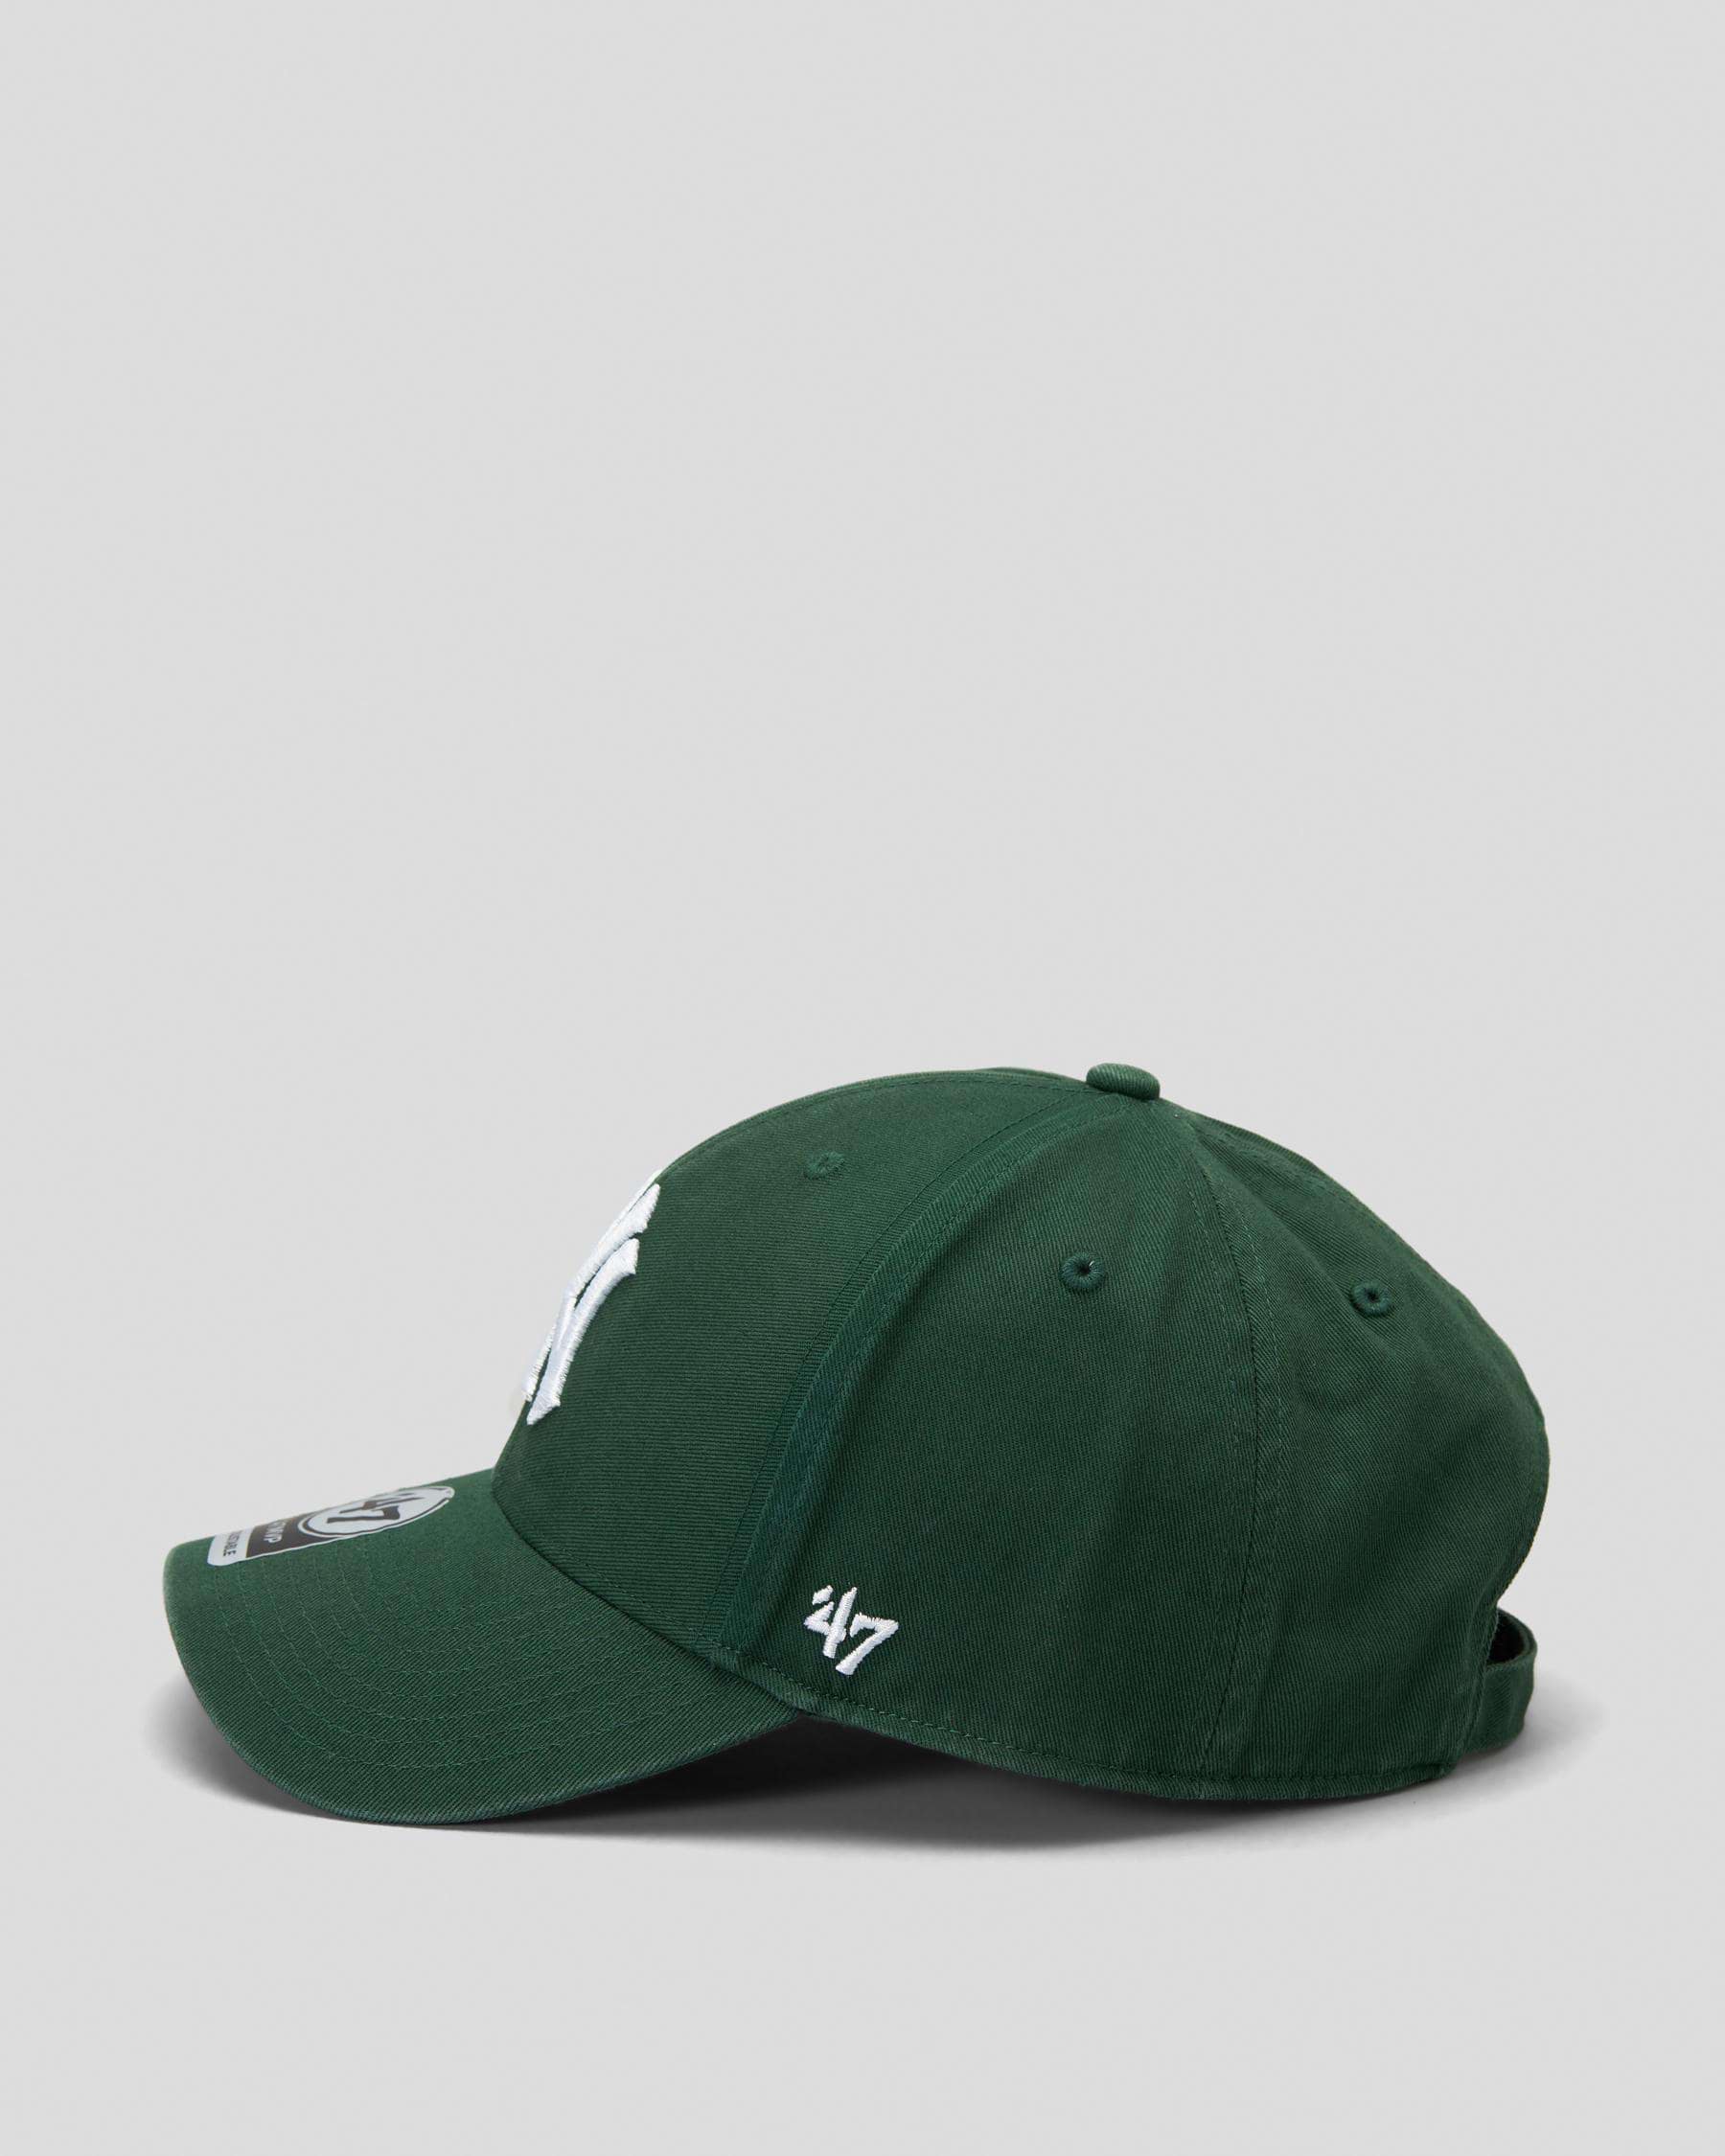 Forty Seven NY Yankees Cap In Dark Green - FREE* Shipping & Easy Returns -  City Beach United States